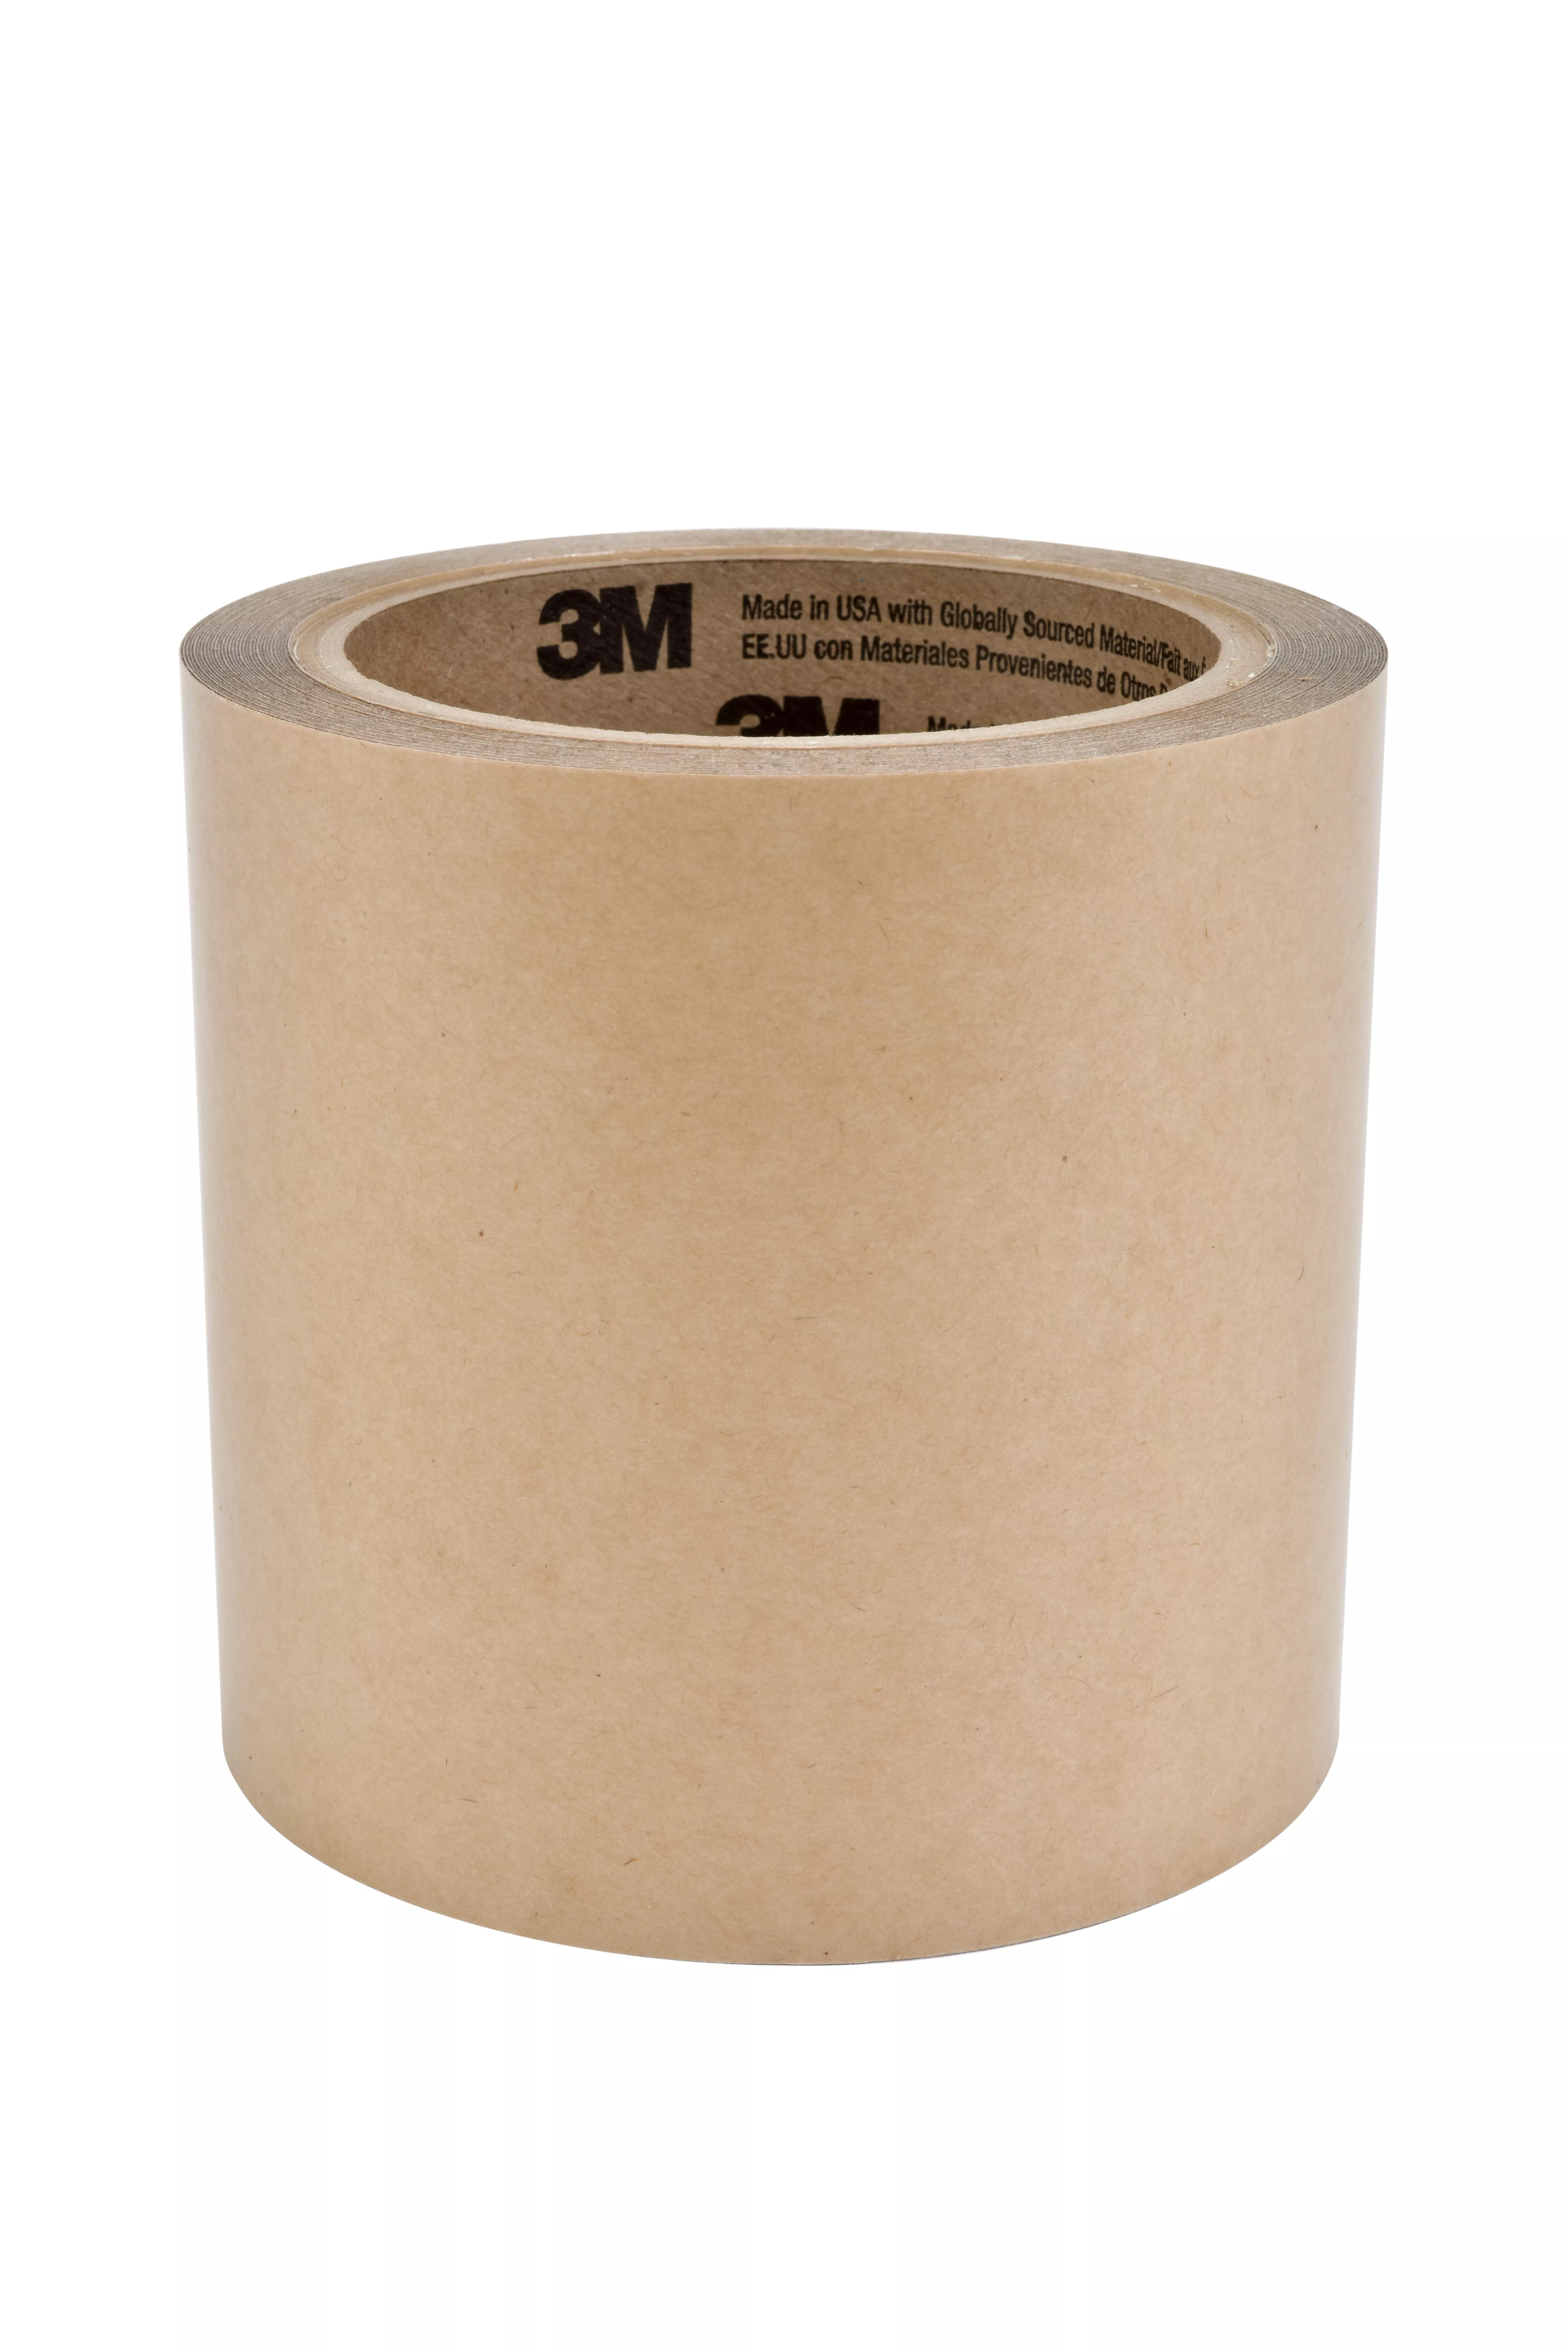 3M™ Adhesive Transfer Tape L3+T5, Clear, 54 in x 250 yd, 5 mil, 3
Roll/Pallet